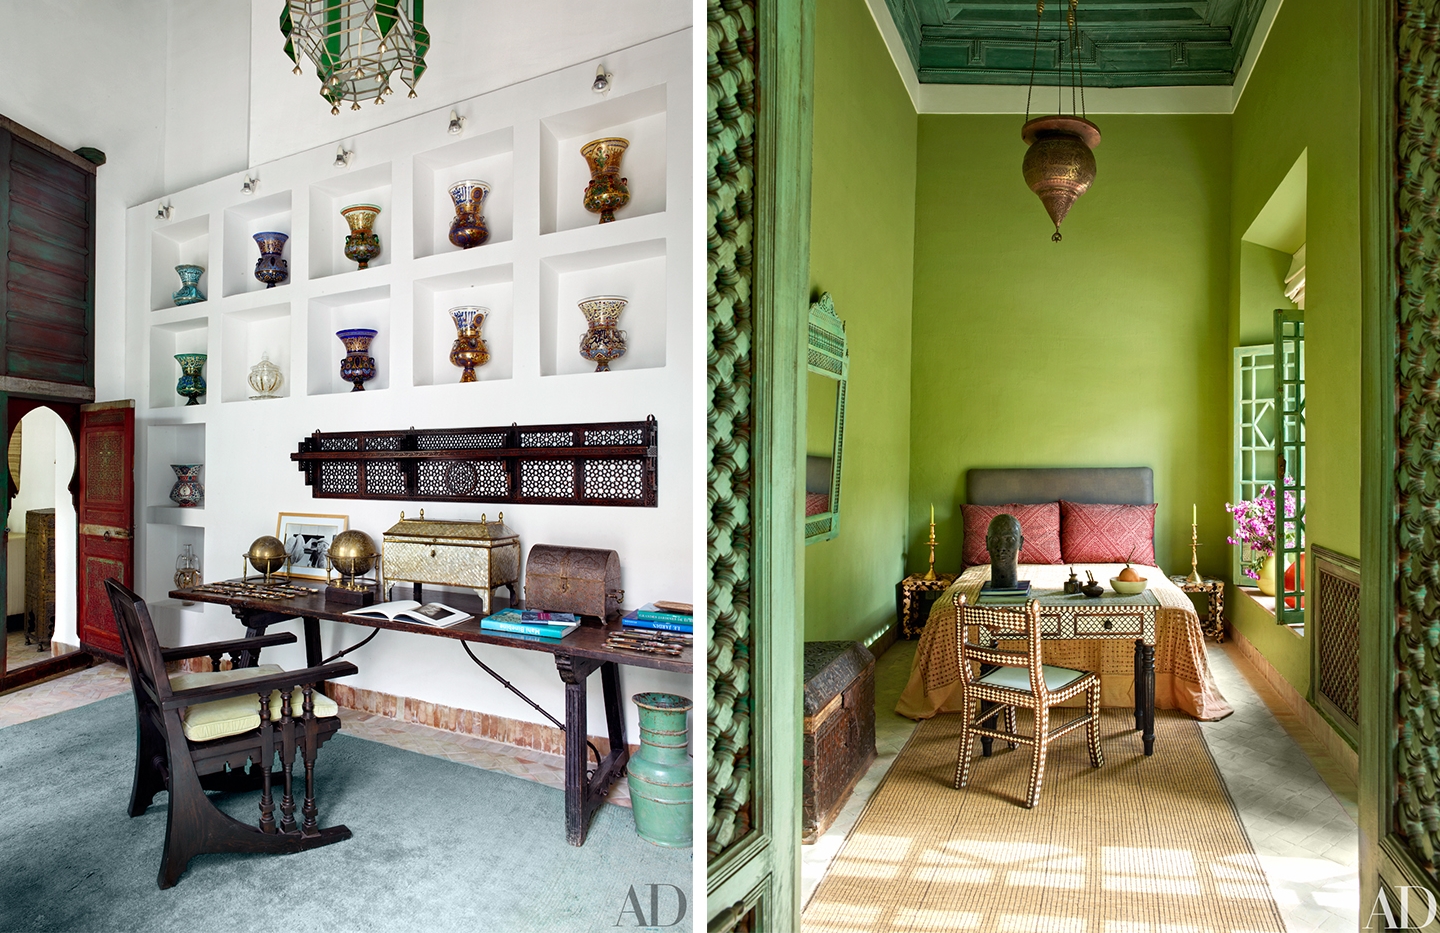  Images courtesy of  Architectural Digest  